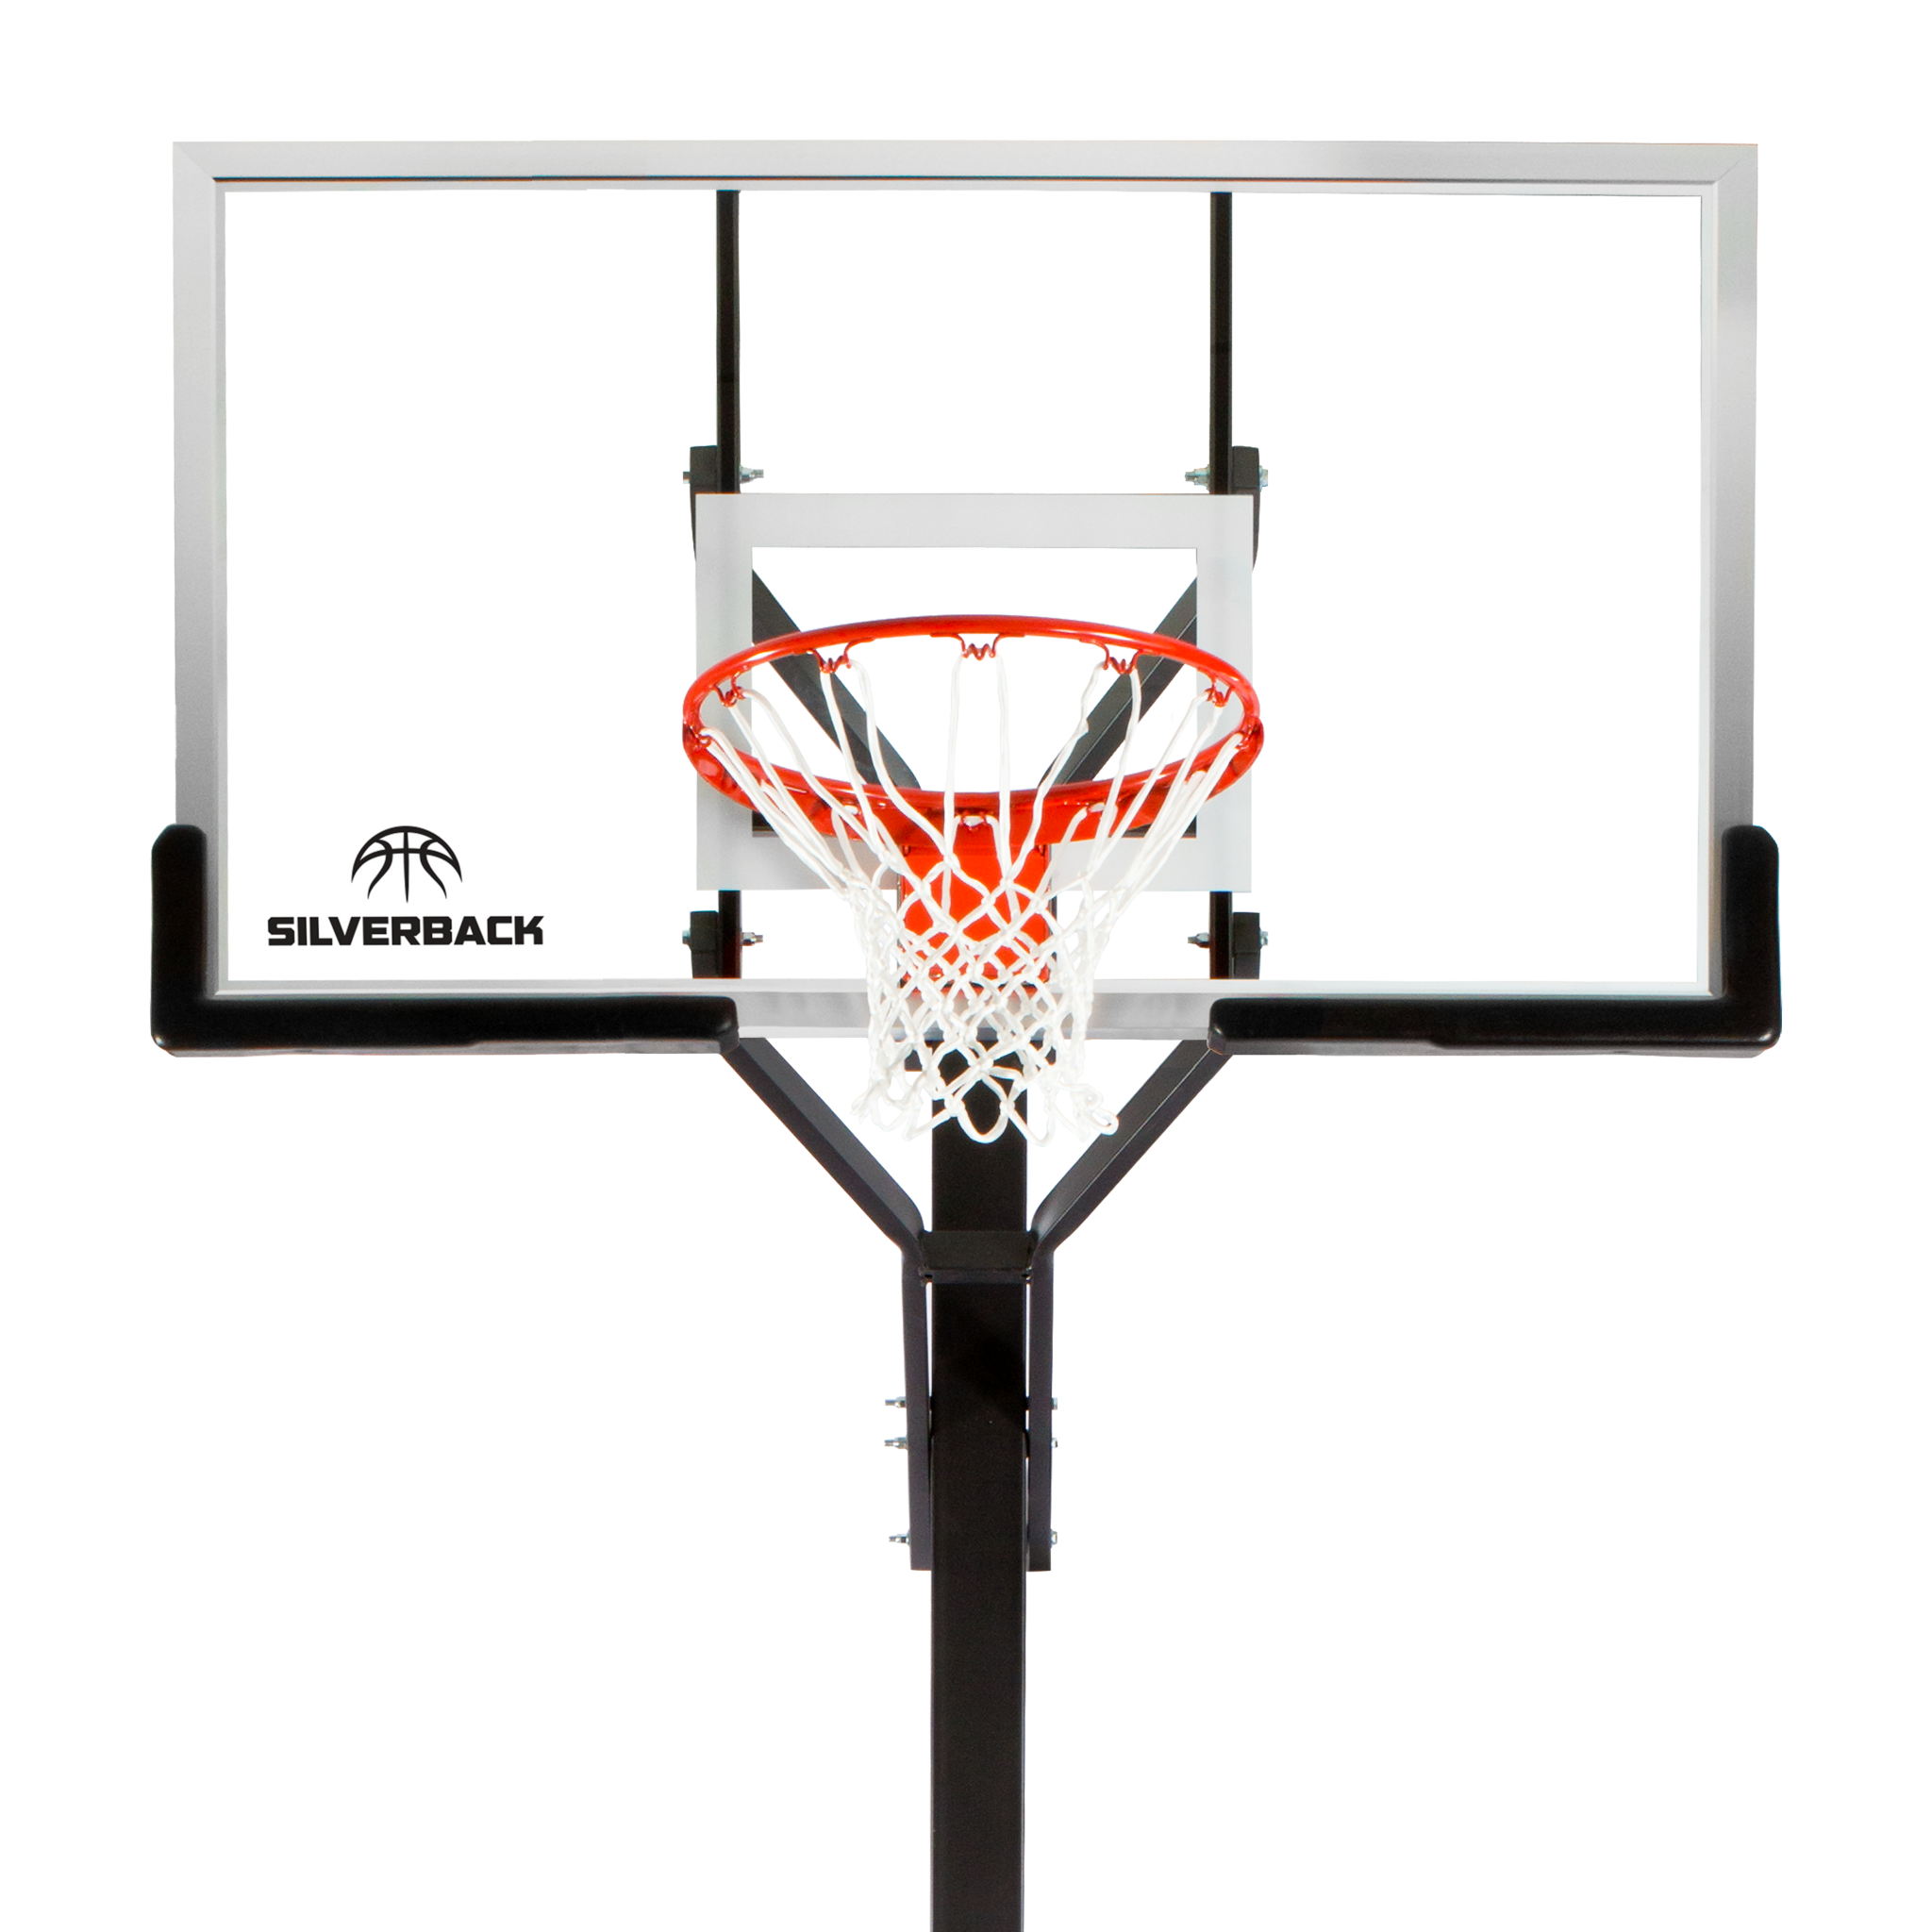 Silverback 60" In-Ground Basketball System with Adjustable-Height Tempered Glass Backboard and Pro-Style Breakaway Rim - image 4 of 23